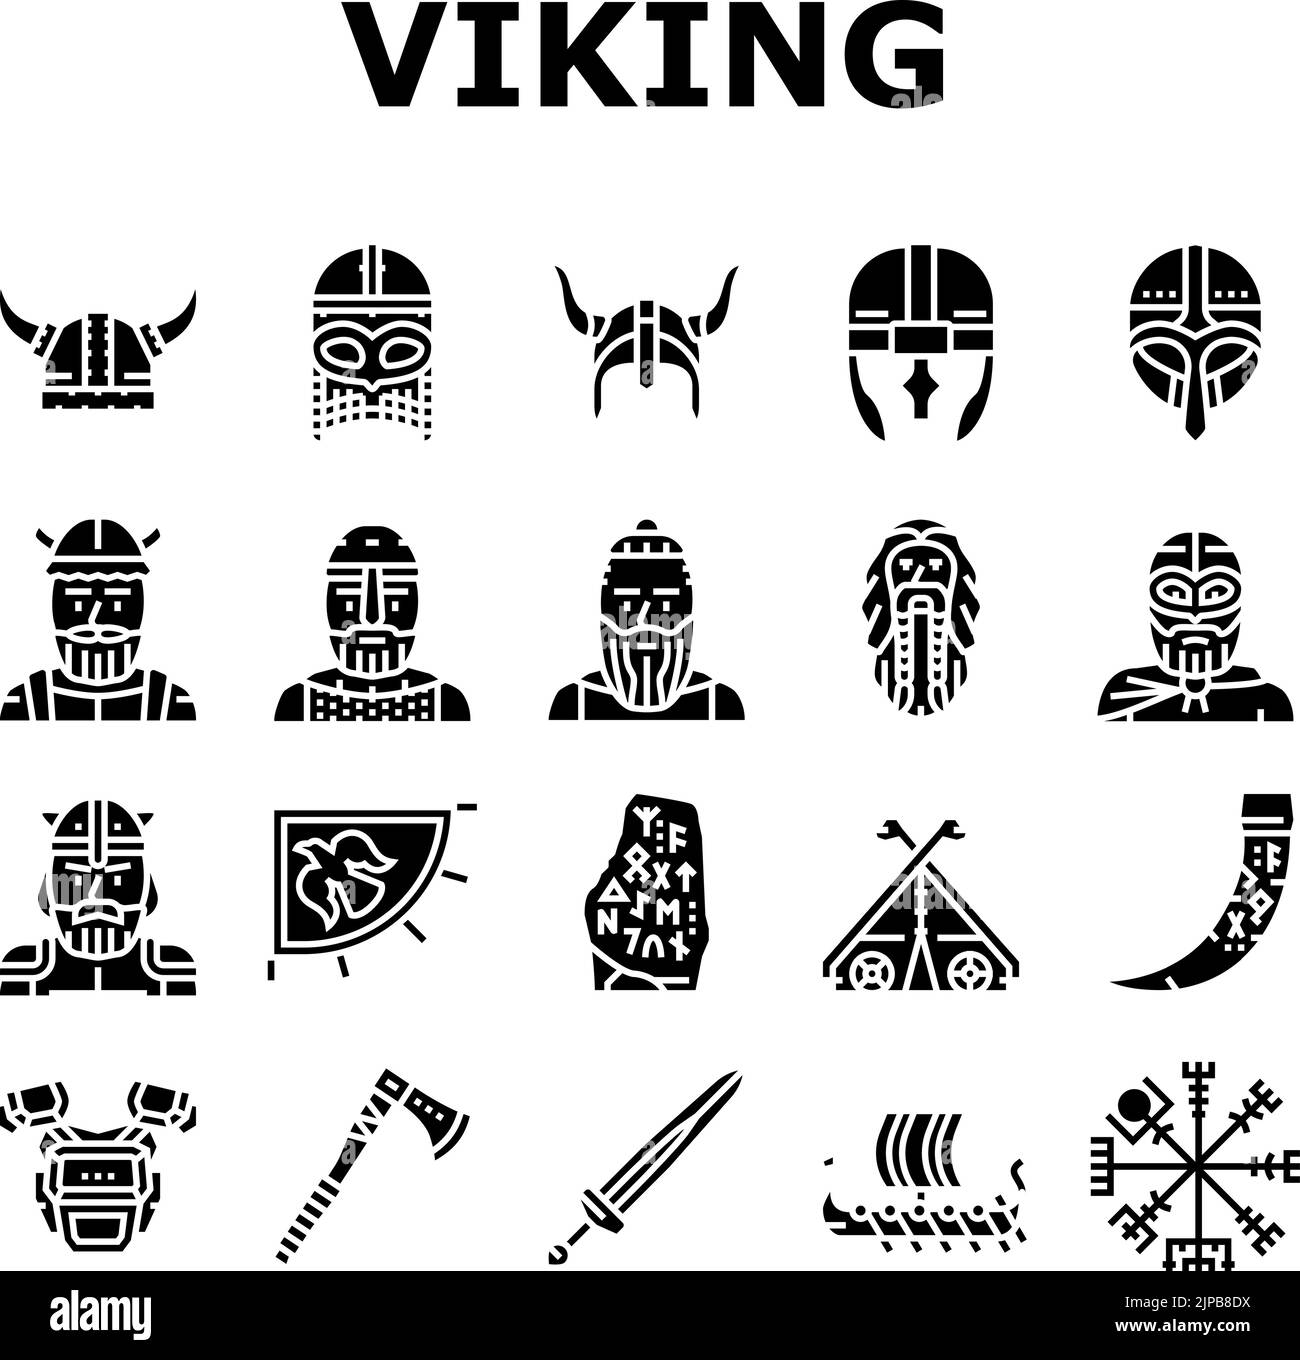 viking medieval norse helmet icons set vector Stock Vector